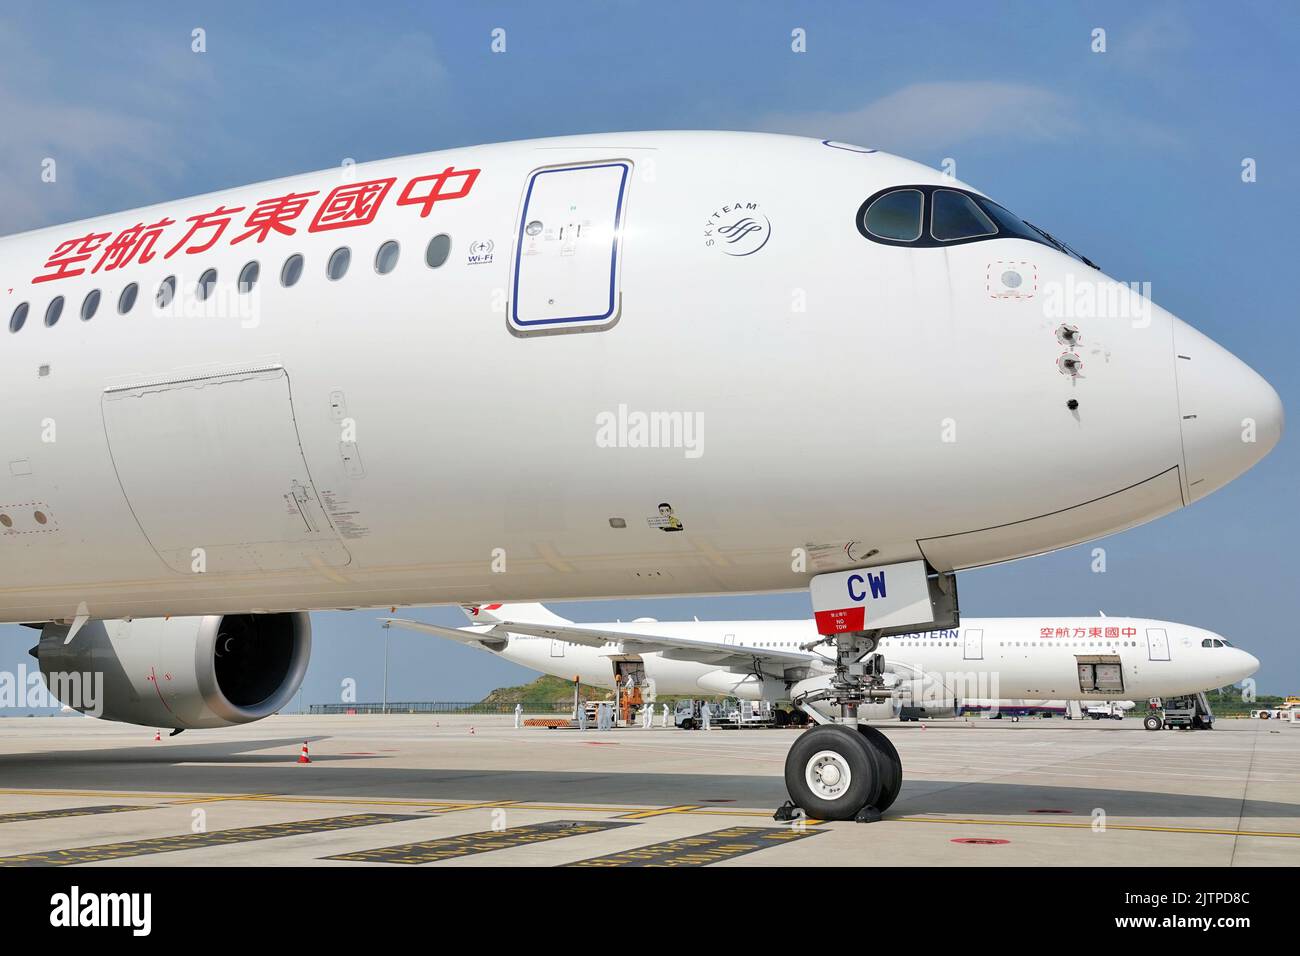 YANTAI, CHINA - SEPTEMBER 1, 2022 - Two cargo planes on the International Air Cargo route between Yantai and Liege, Belgium, load at Yantai Penglai In Stock Photo